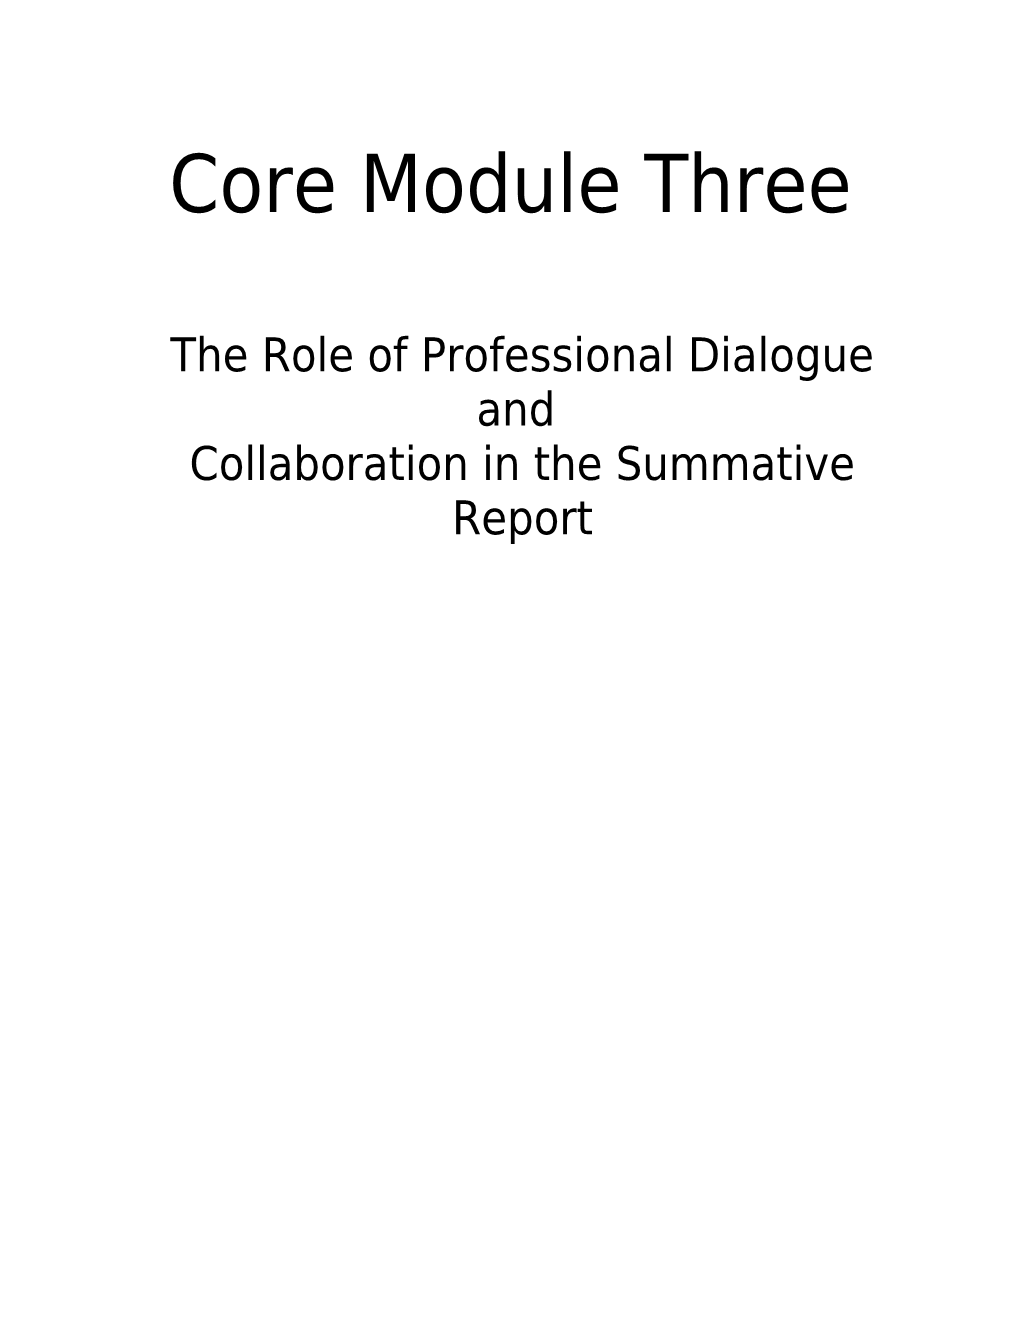 Module 3 - the Role of Professional Dialogue And